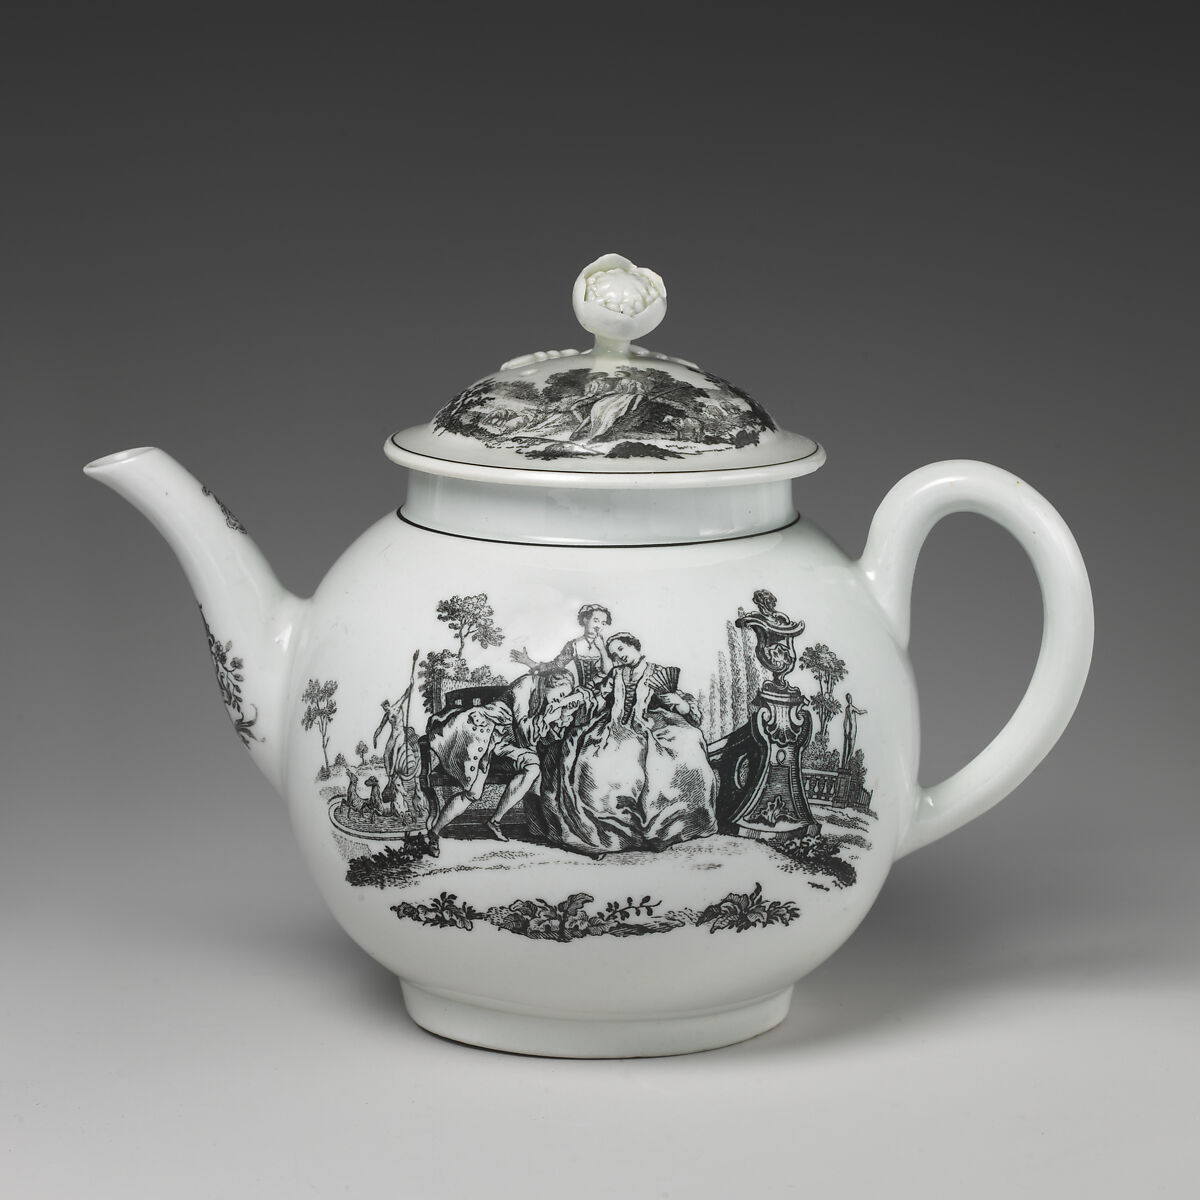 Teapot with L’amour, Worcester factory (British, 1751–2008), Soft-paste porcelain with transfer-printed decoration, British, Worcester 